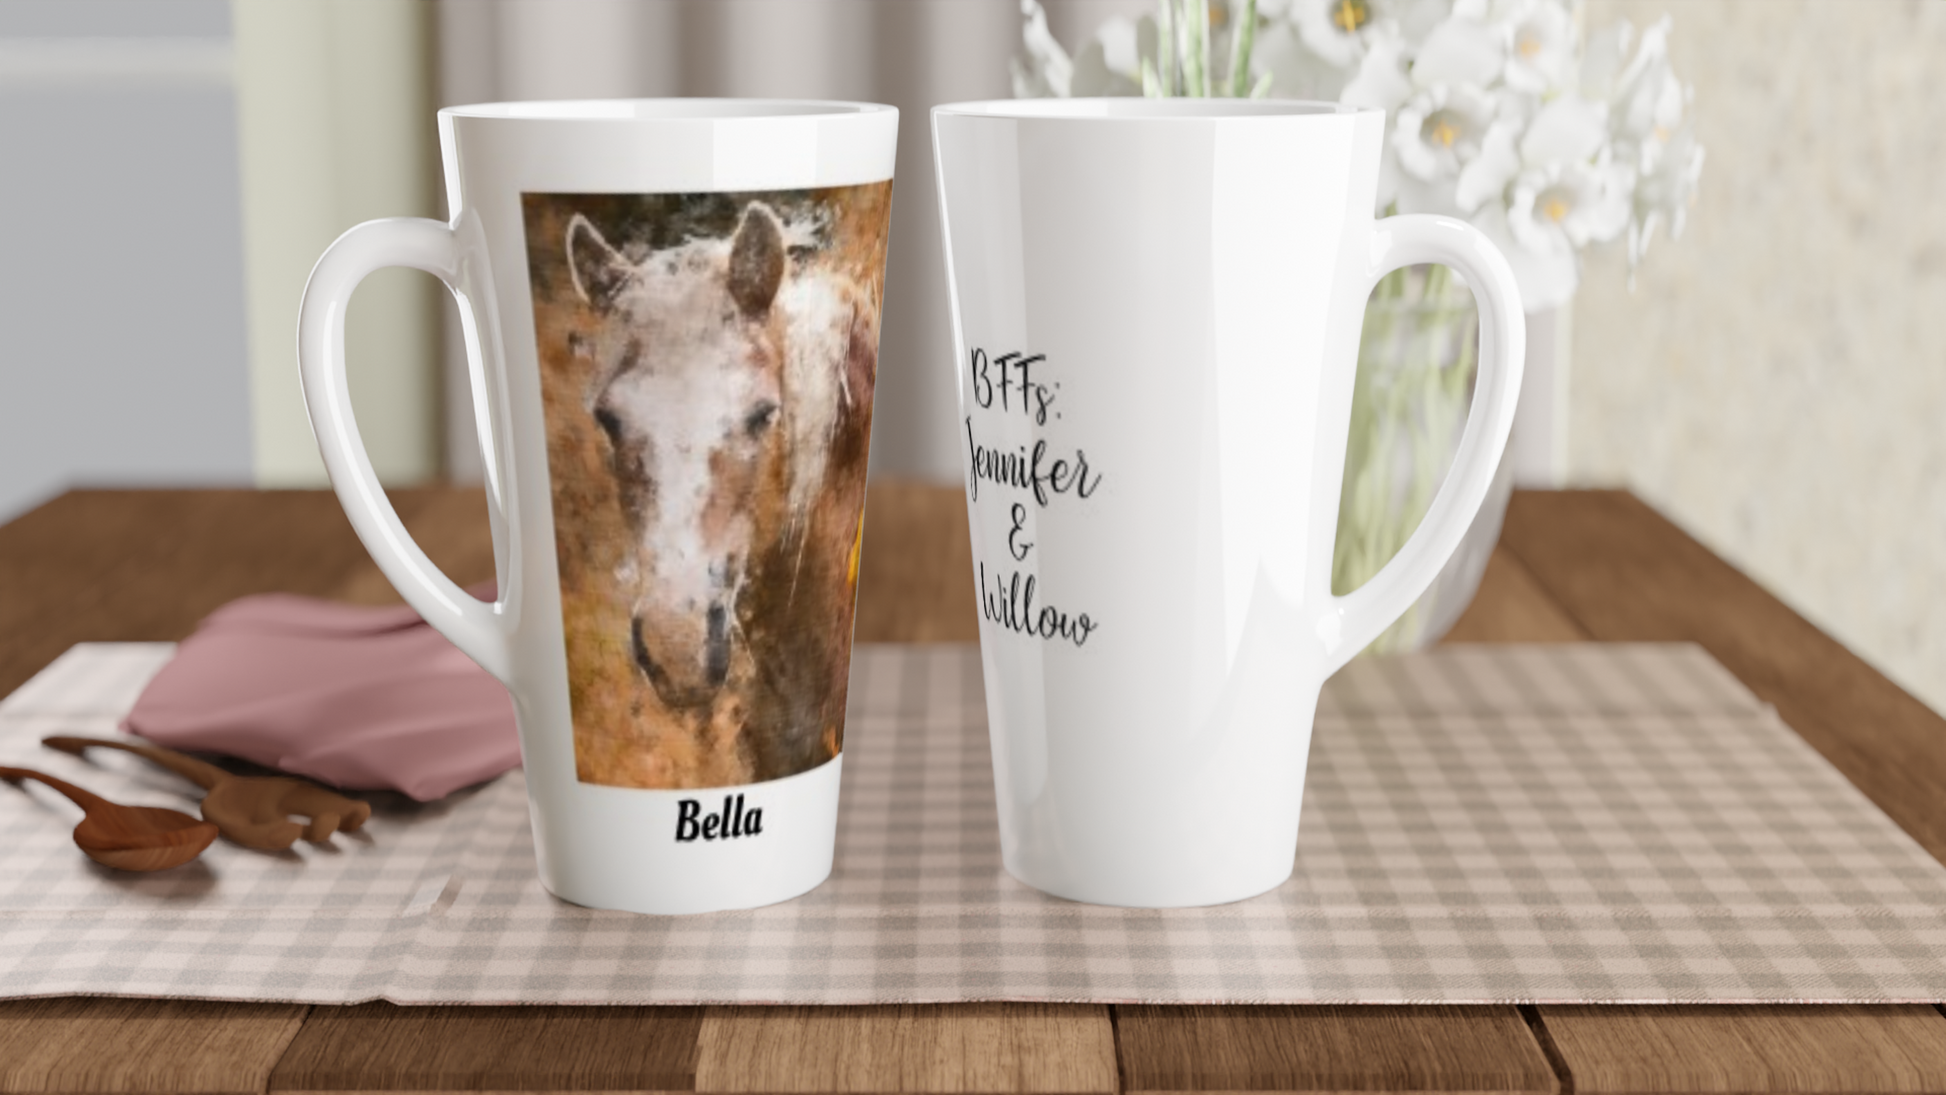 Hand Drawn Horse || Latte 17oz Ceramic Mug - Oil Painting - Personalized; Personalized with your horse